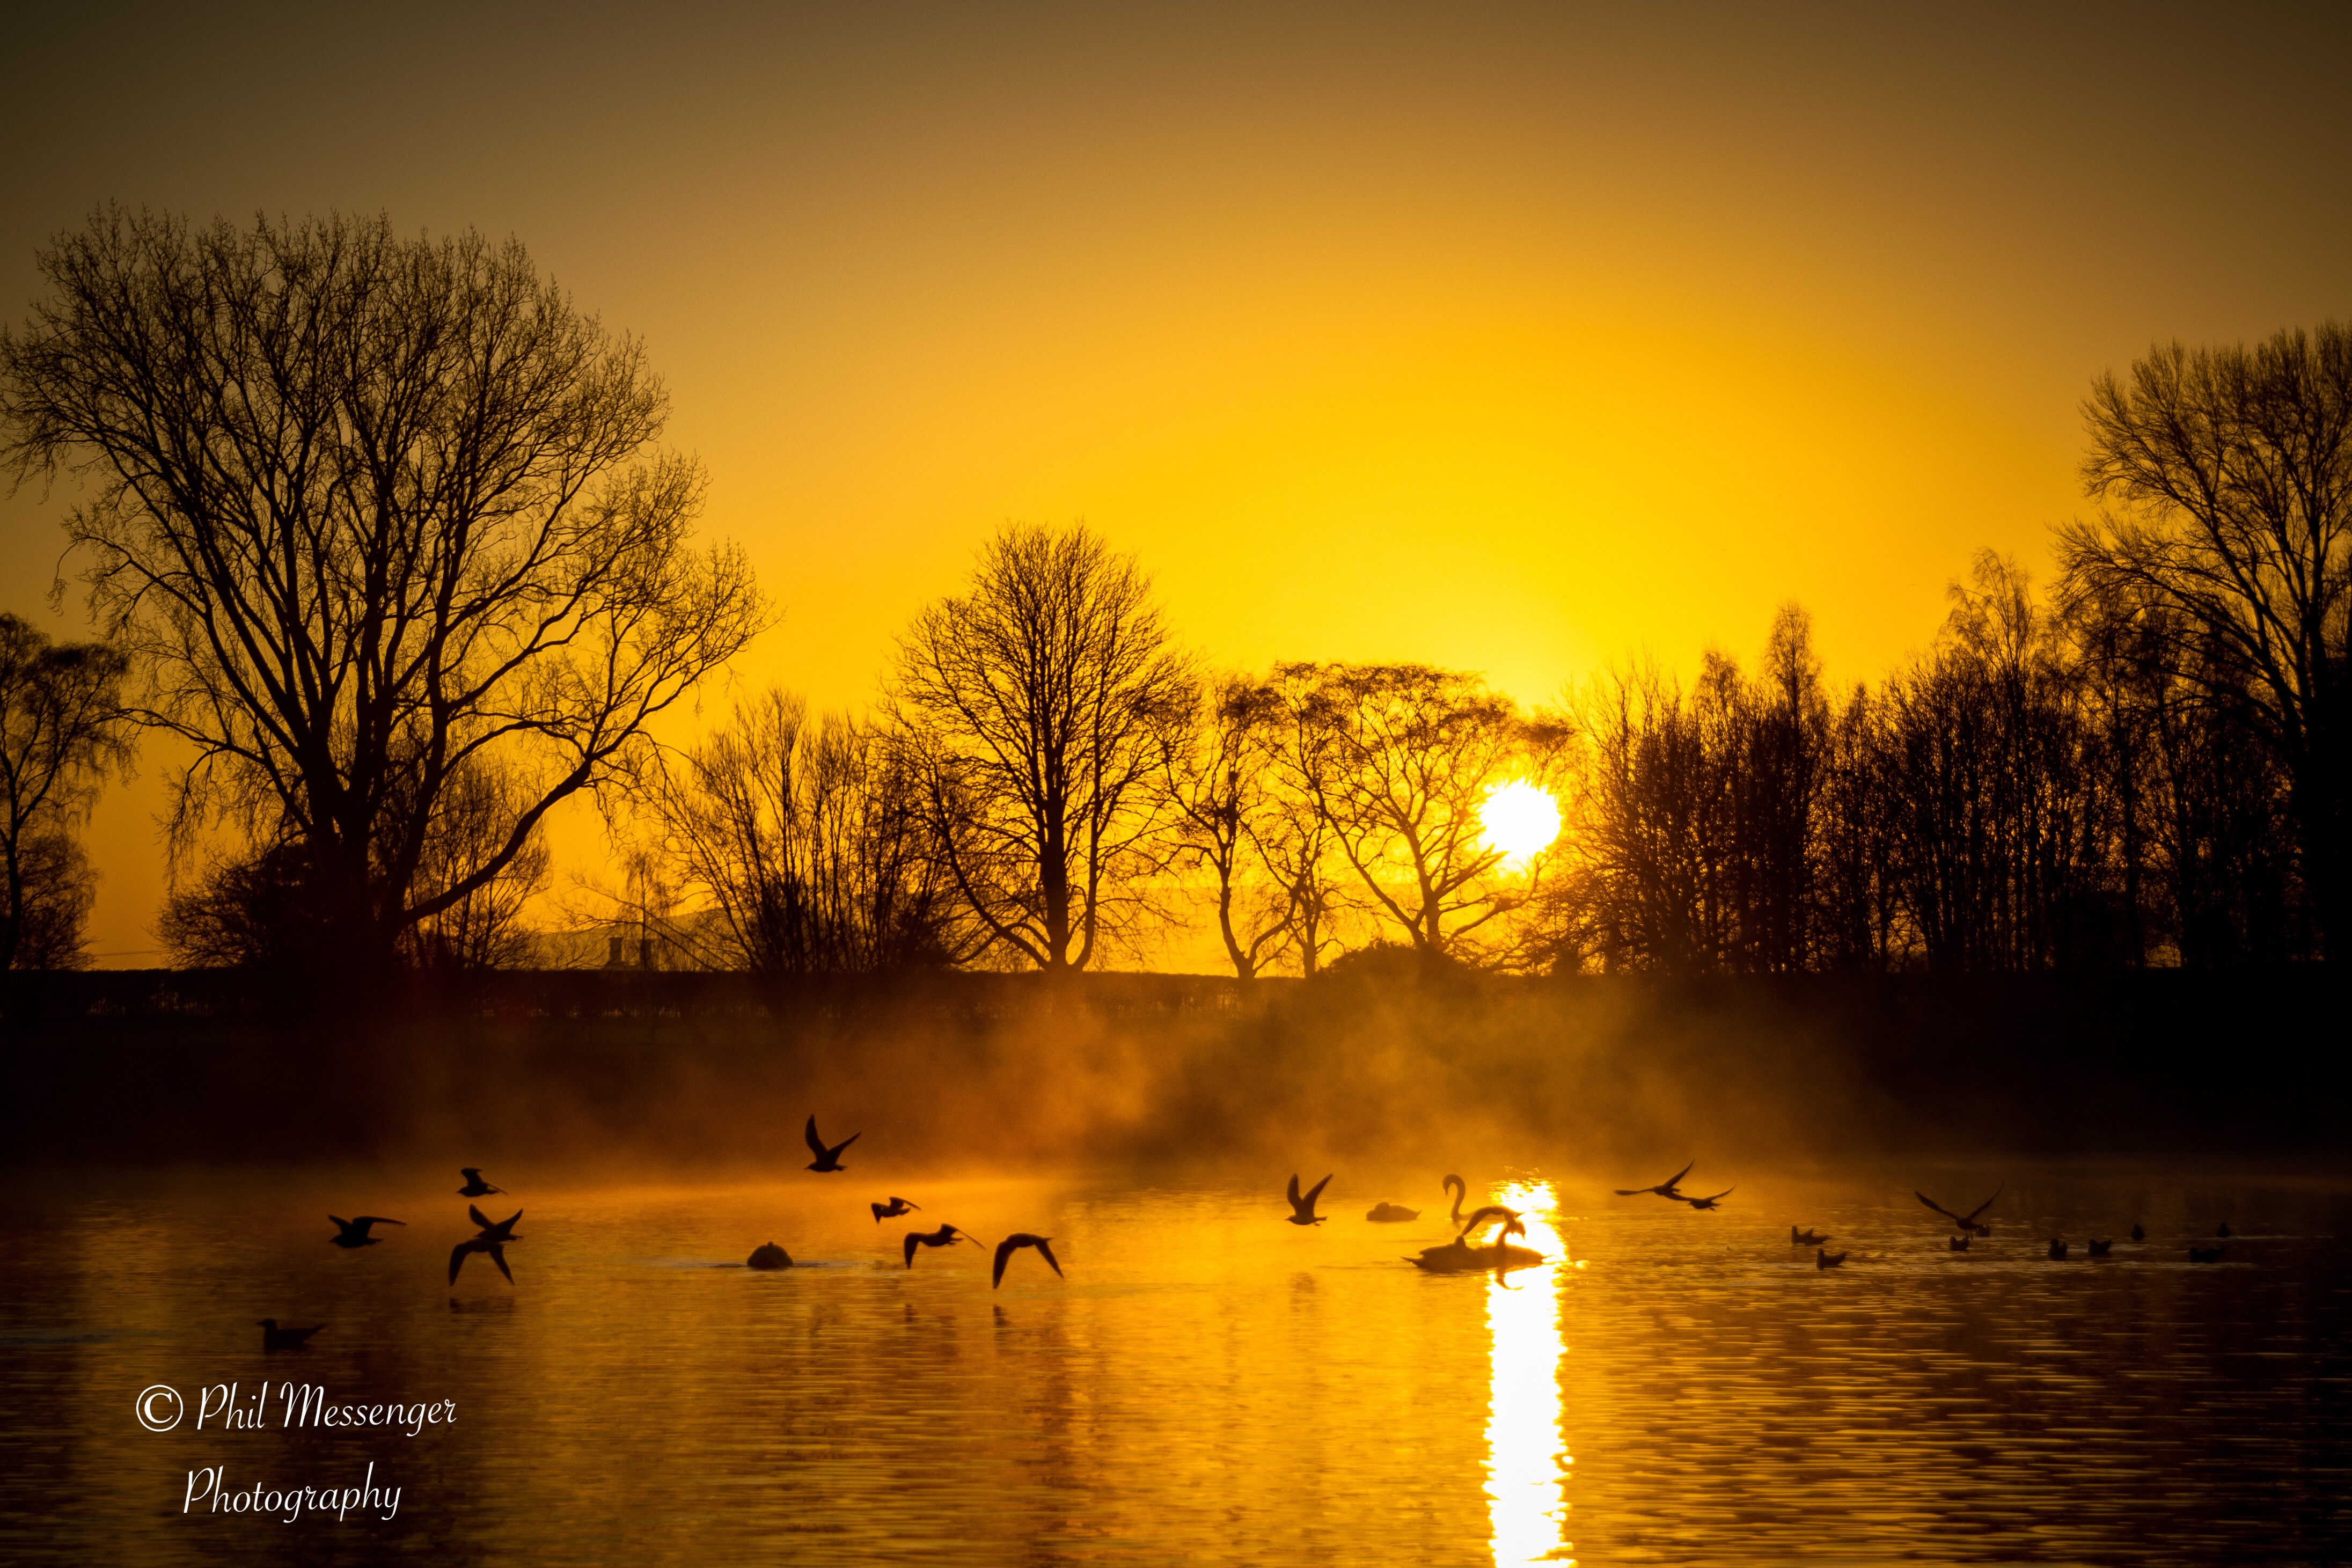 Birds bustling into life as the sun rises at Coate, Water, Swindon.